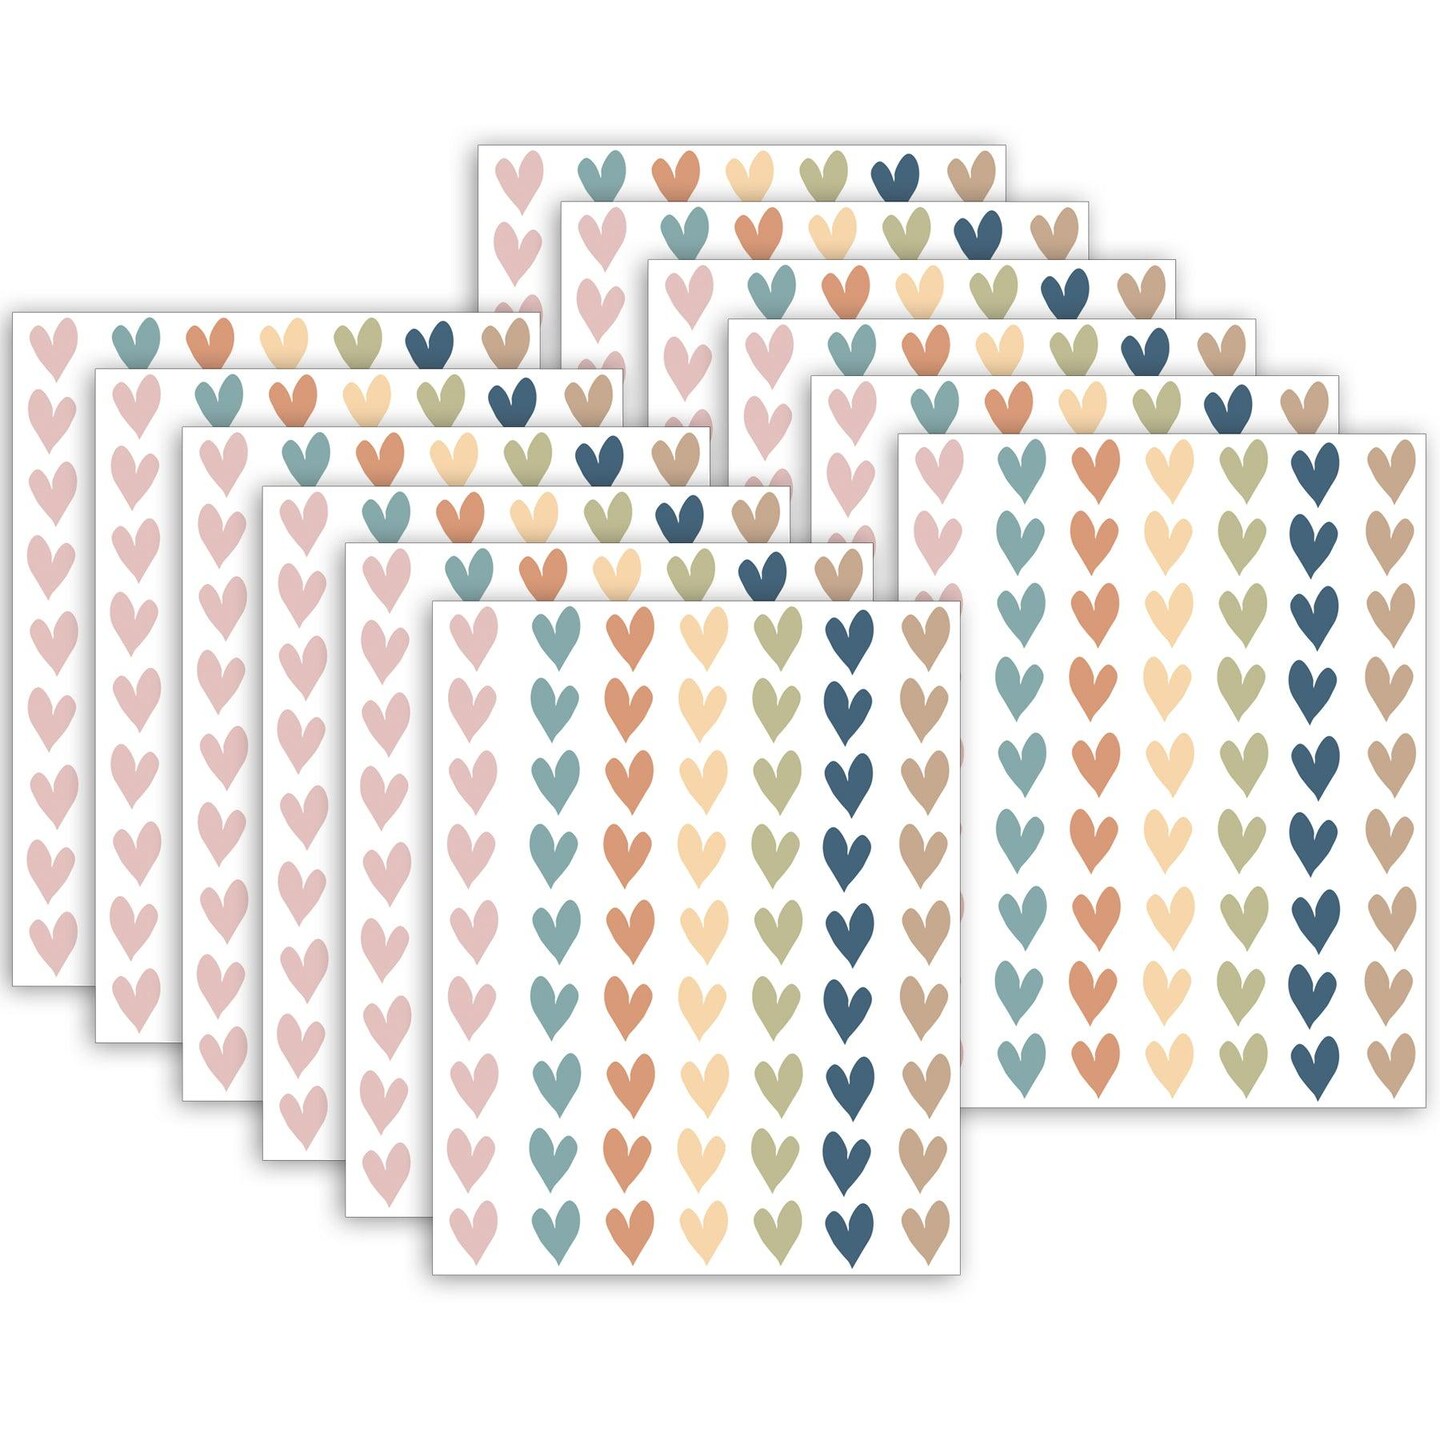 Everyone is Welcome Hearts Mini Stickers, 378 Per Pack, 12 Packs